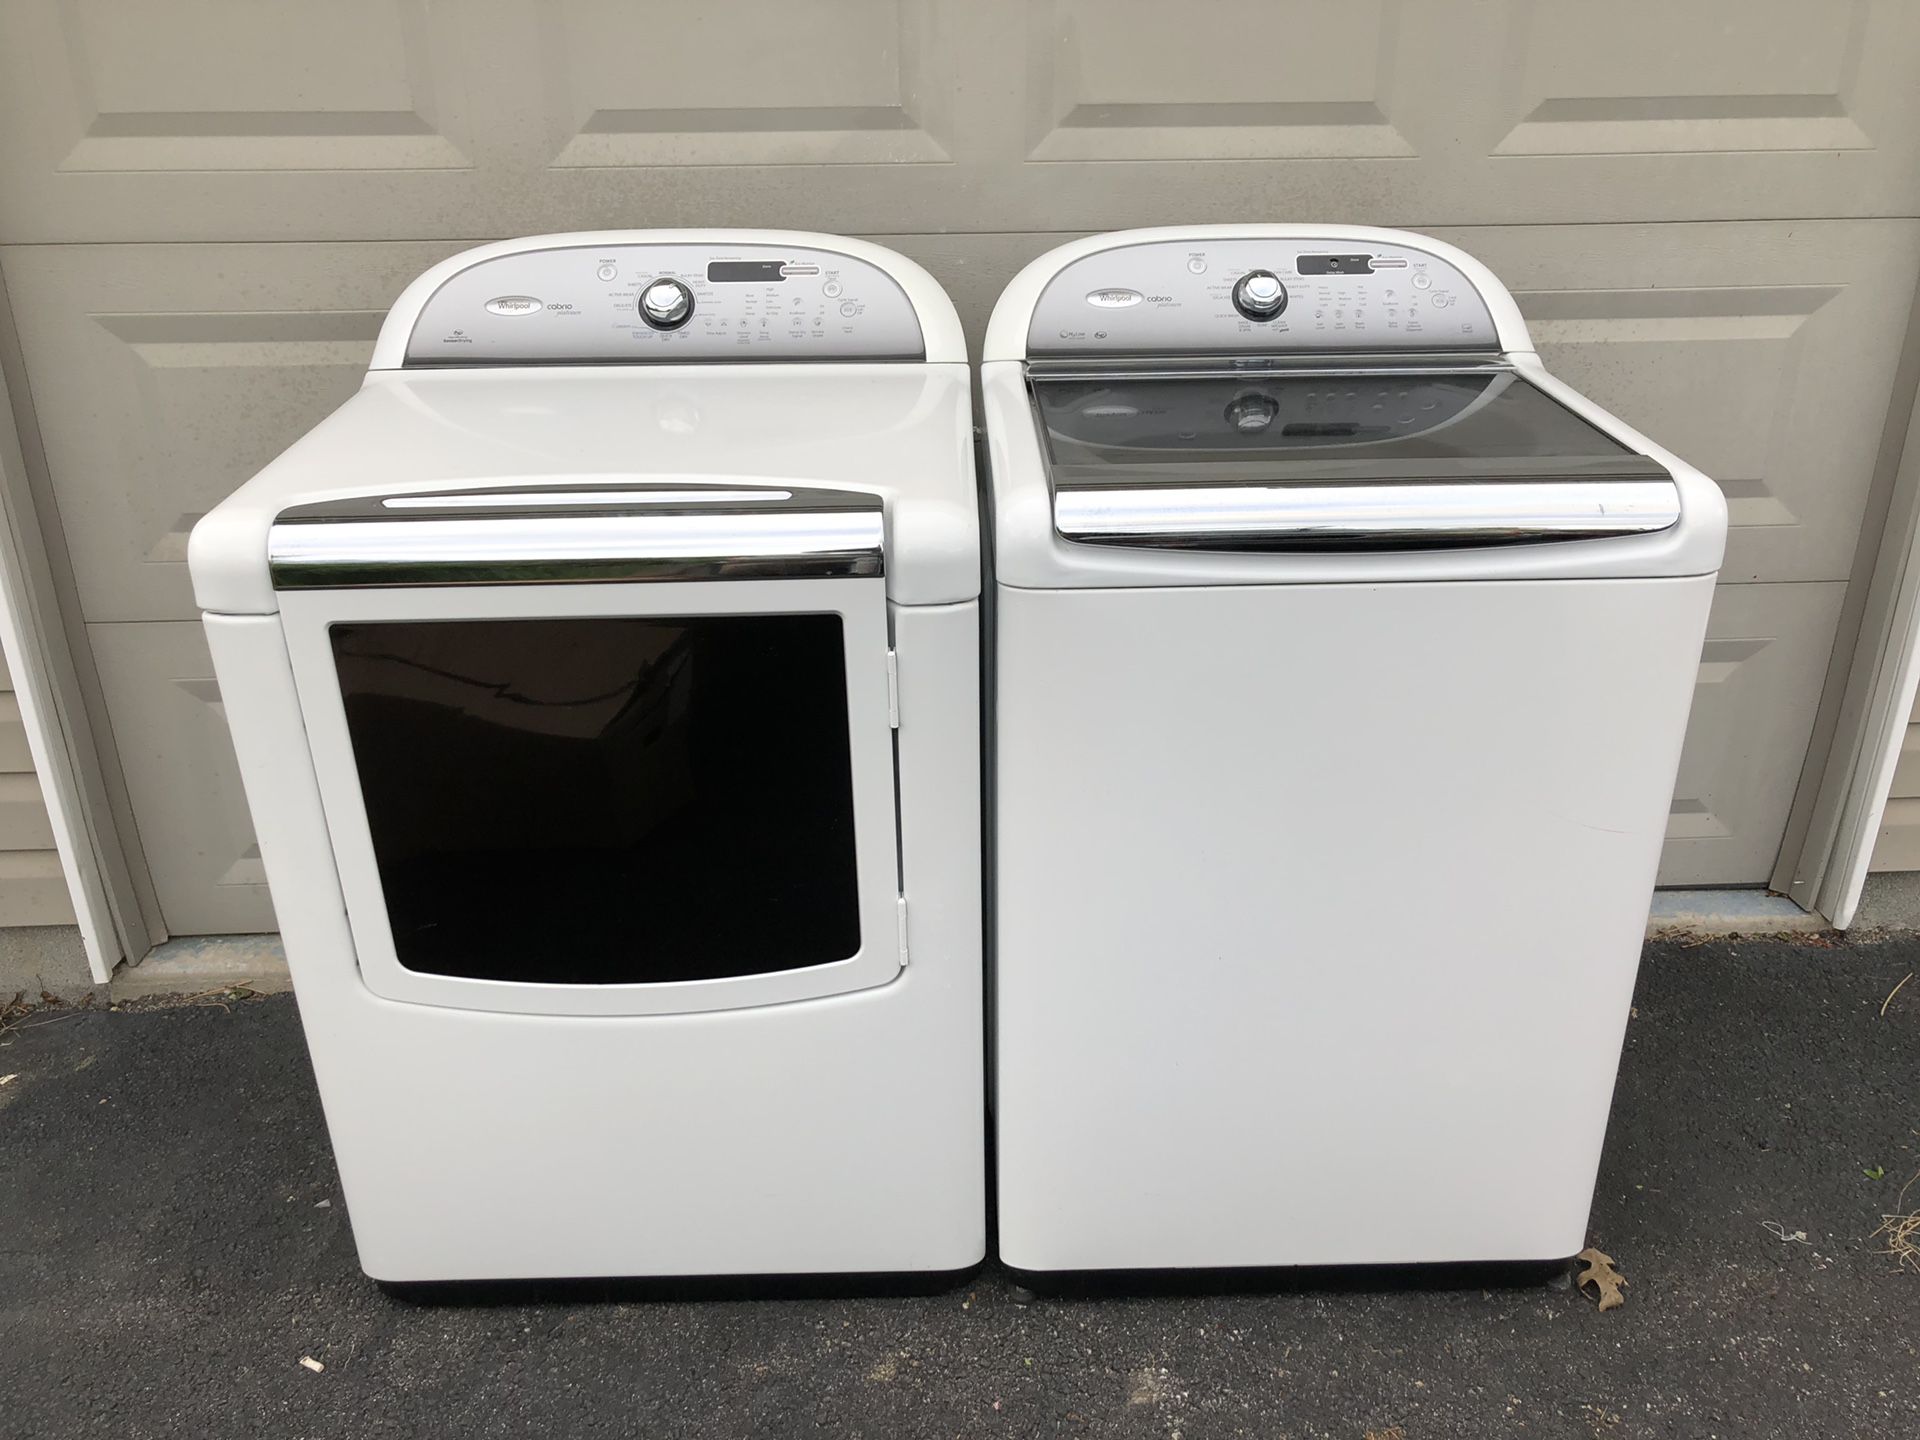 Whirlpool Cabrio Platinum washer and dryer set - electric